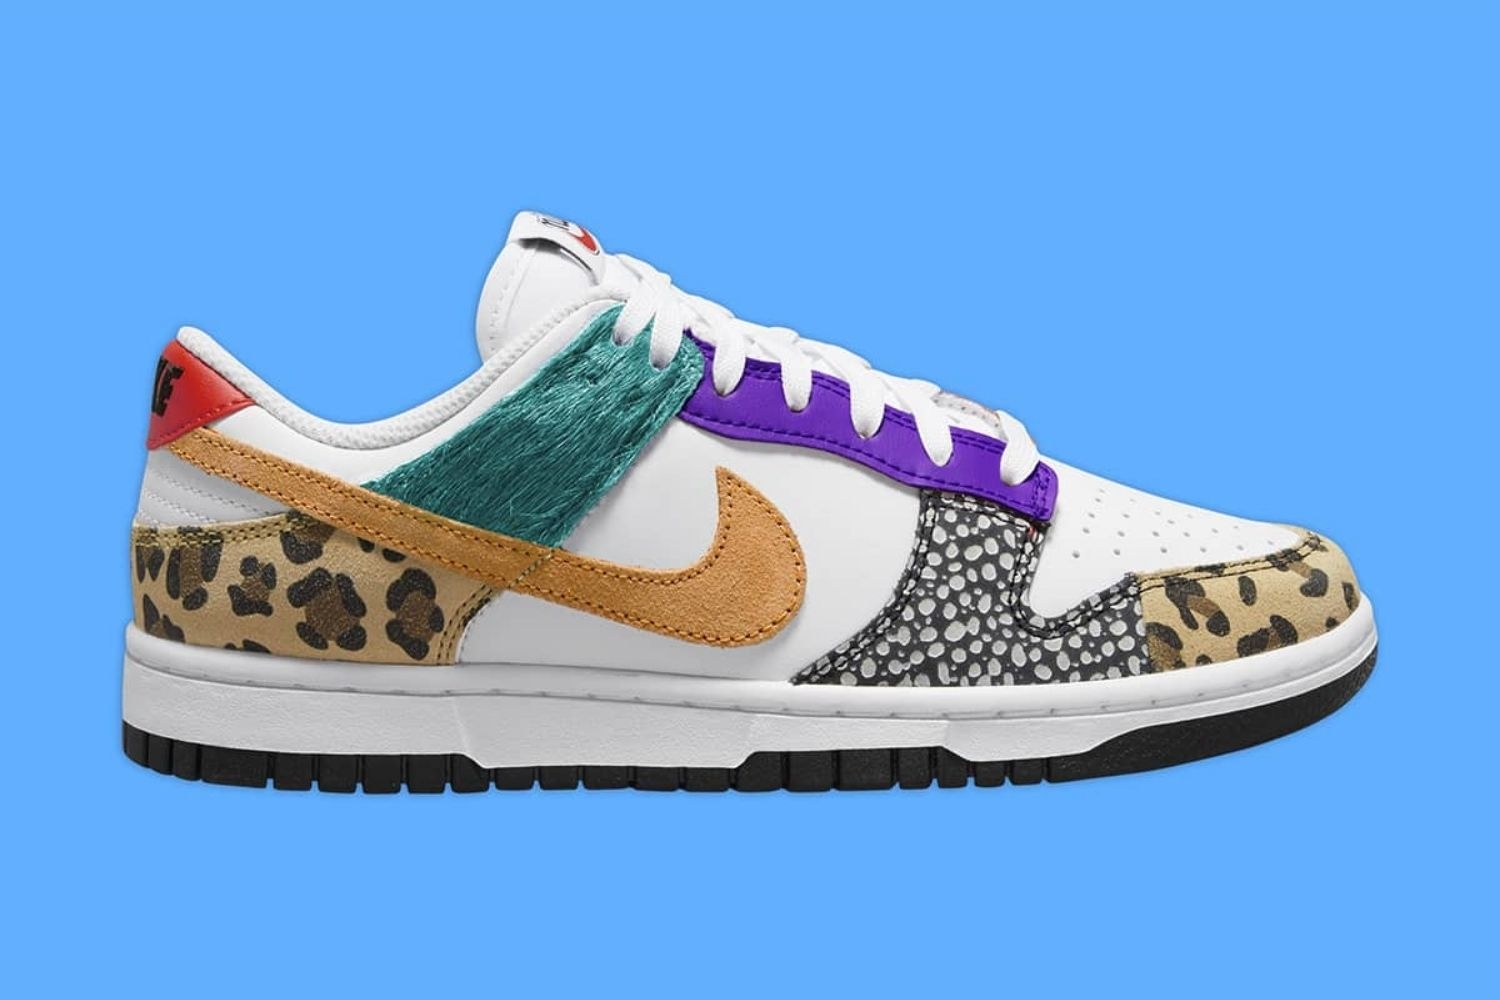 Check out the Nike Dunk Low 'Safari Mix' here